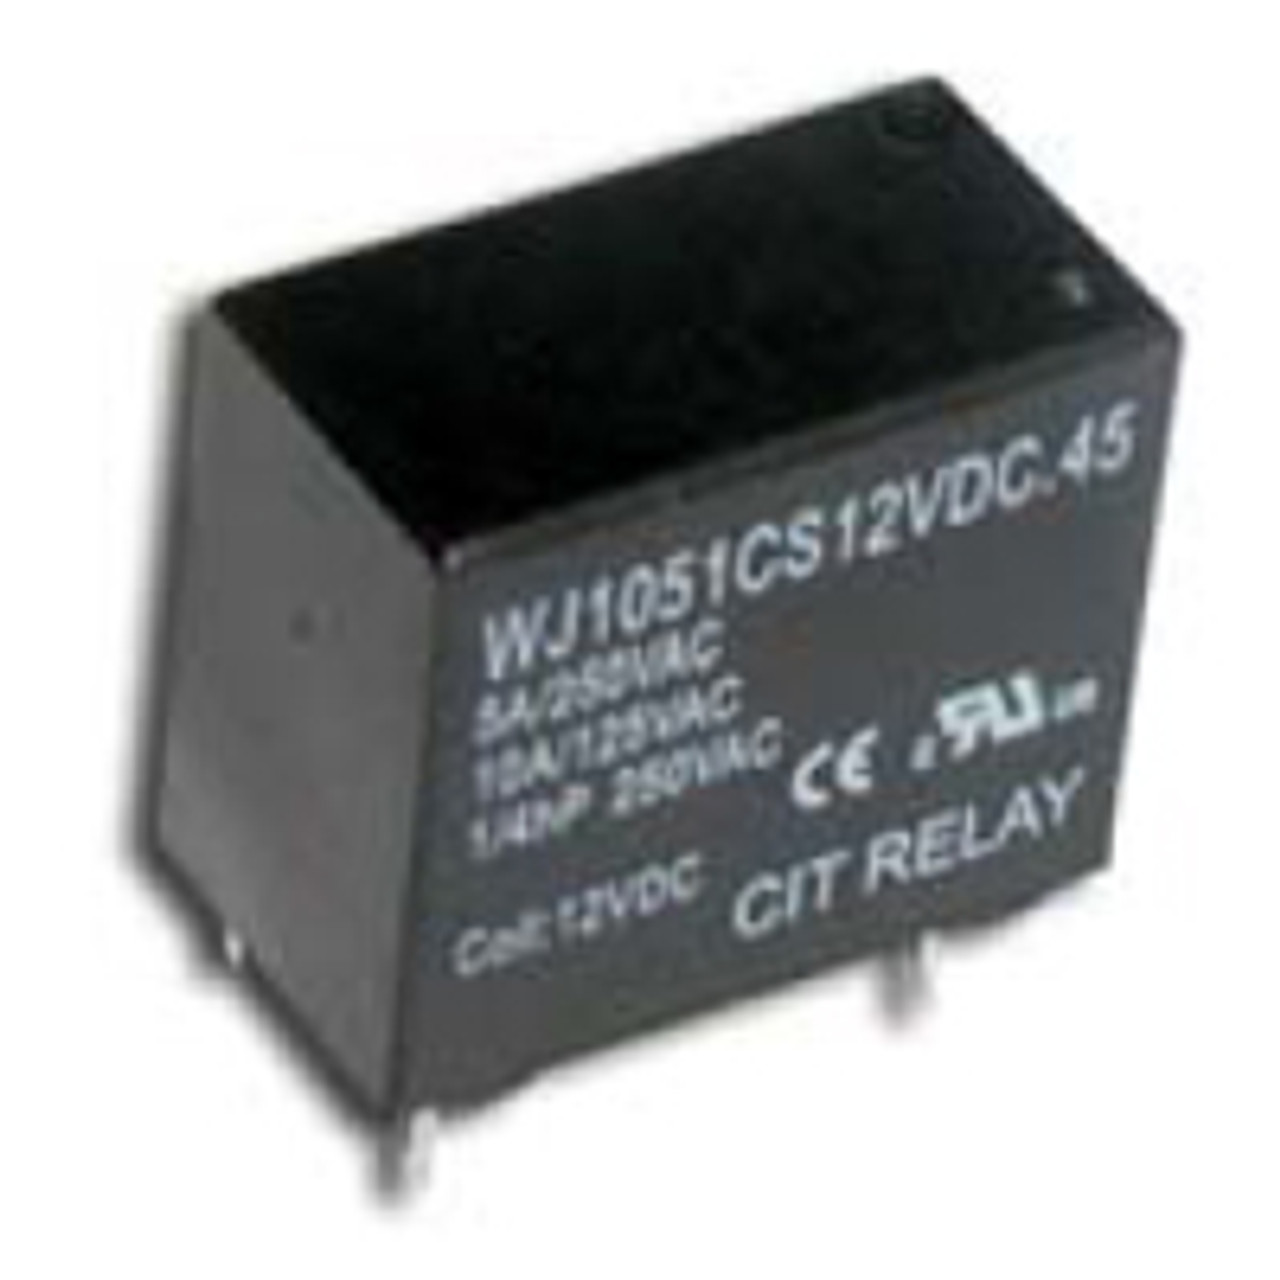 CIT Relay and Switch J1051A48VDC.45 General Purpose Relays